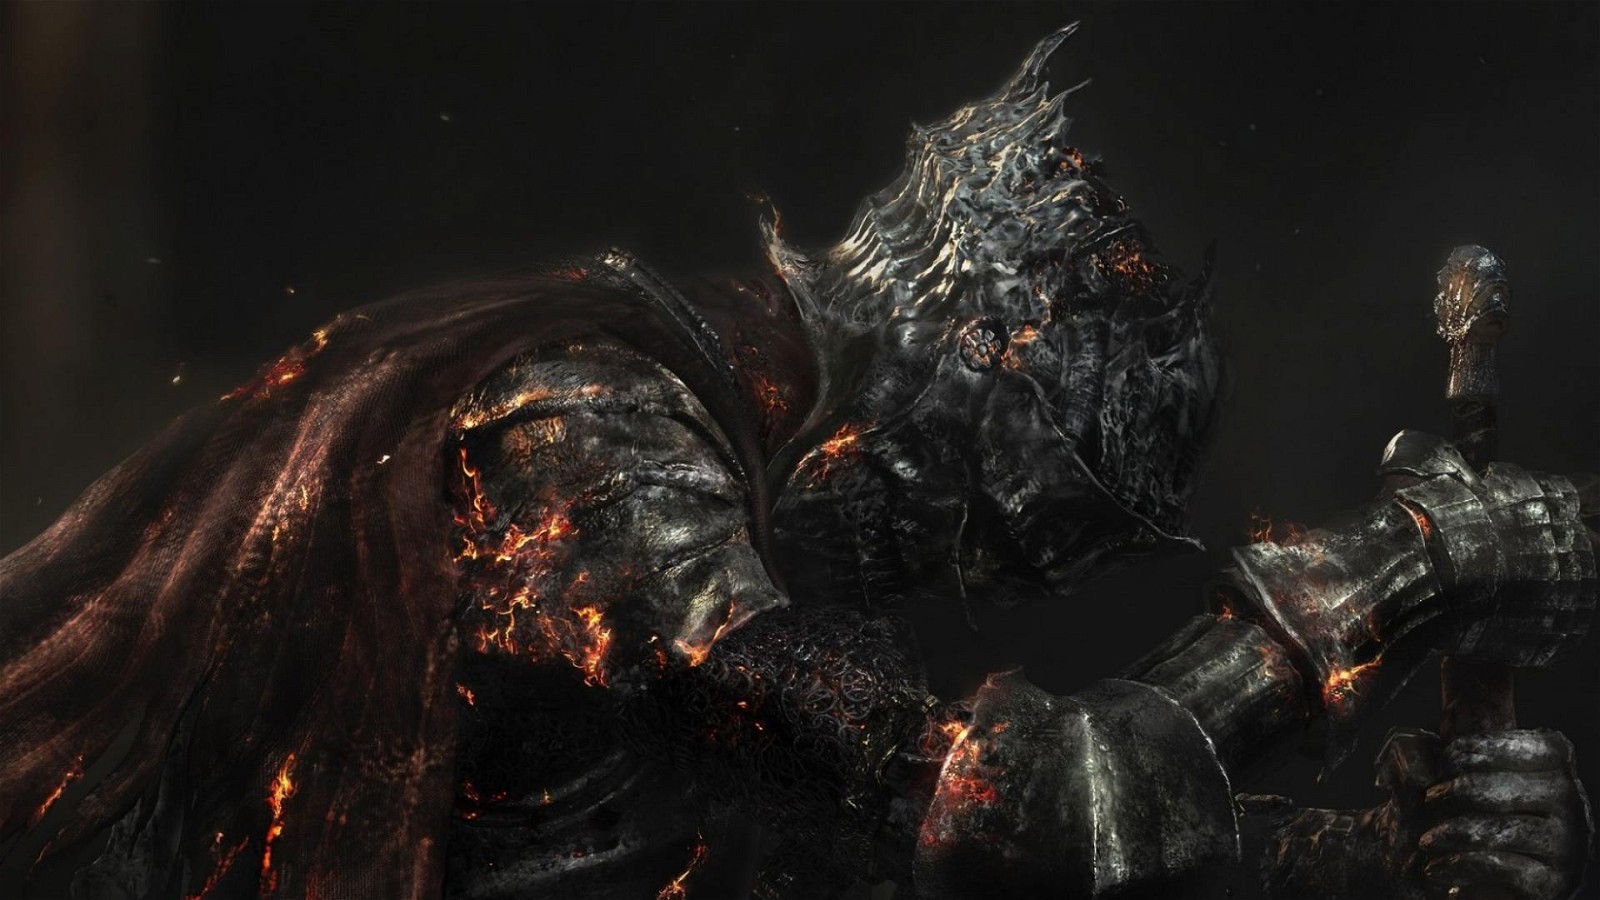 The Soul of Cinder from Dark Souls 3